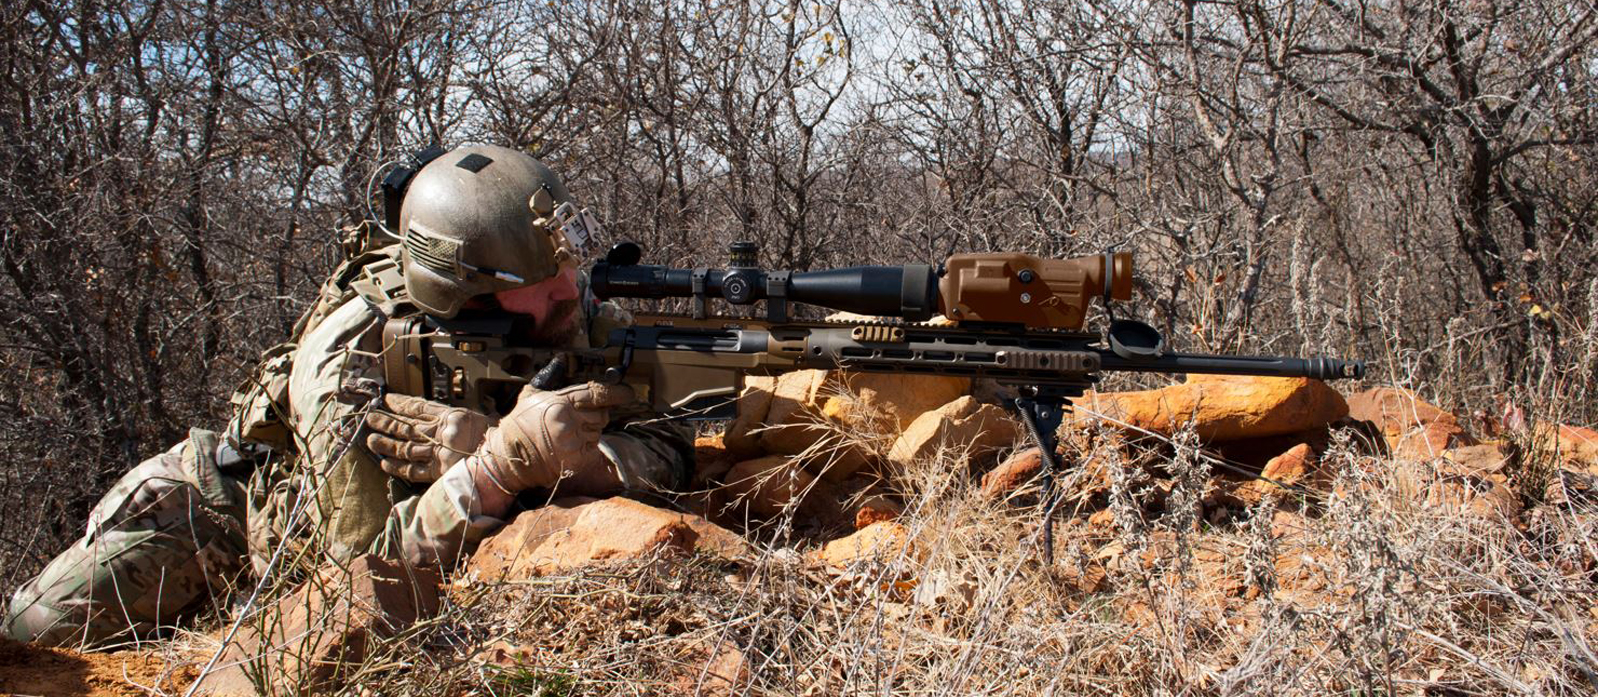 Leonardo DRS Awarded $94 Million Contract for Advanced Infrared Weapon Sights for Army Snipers